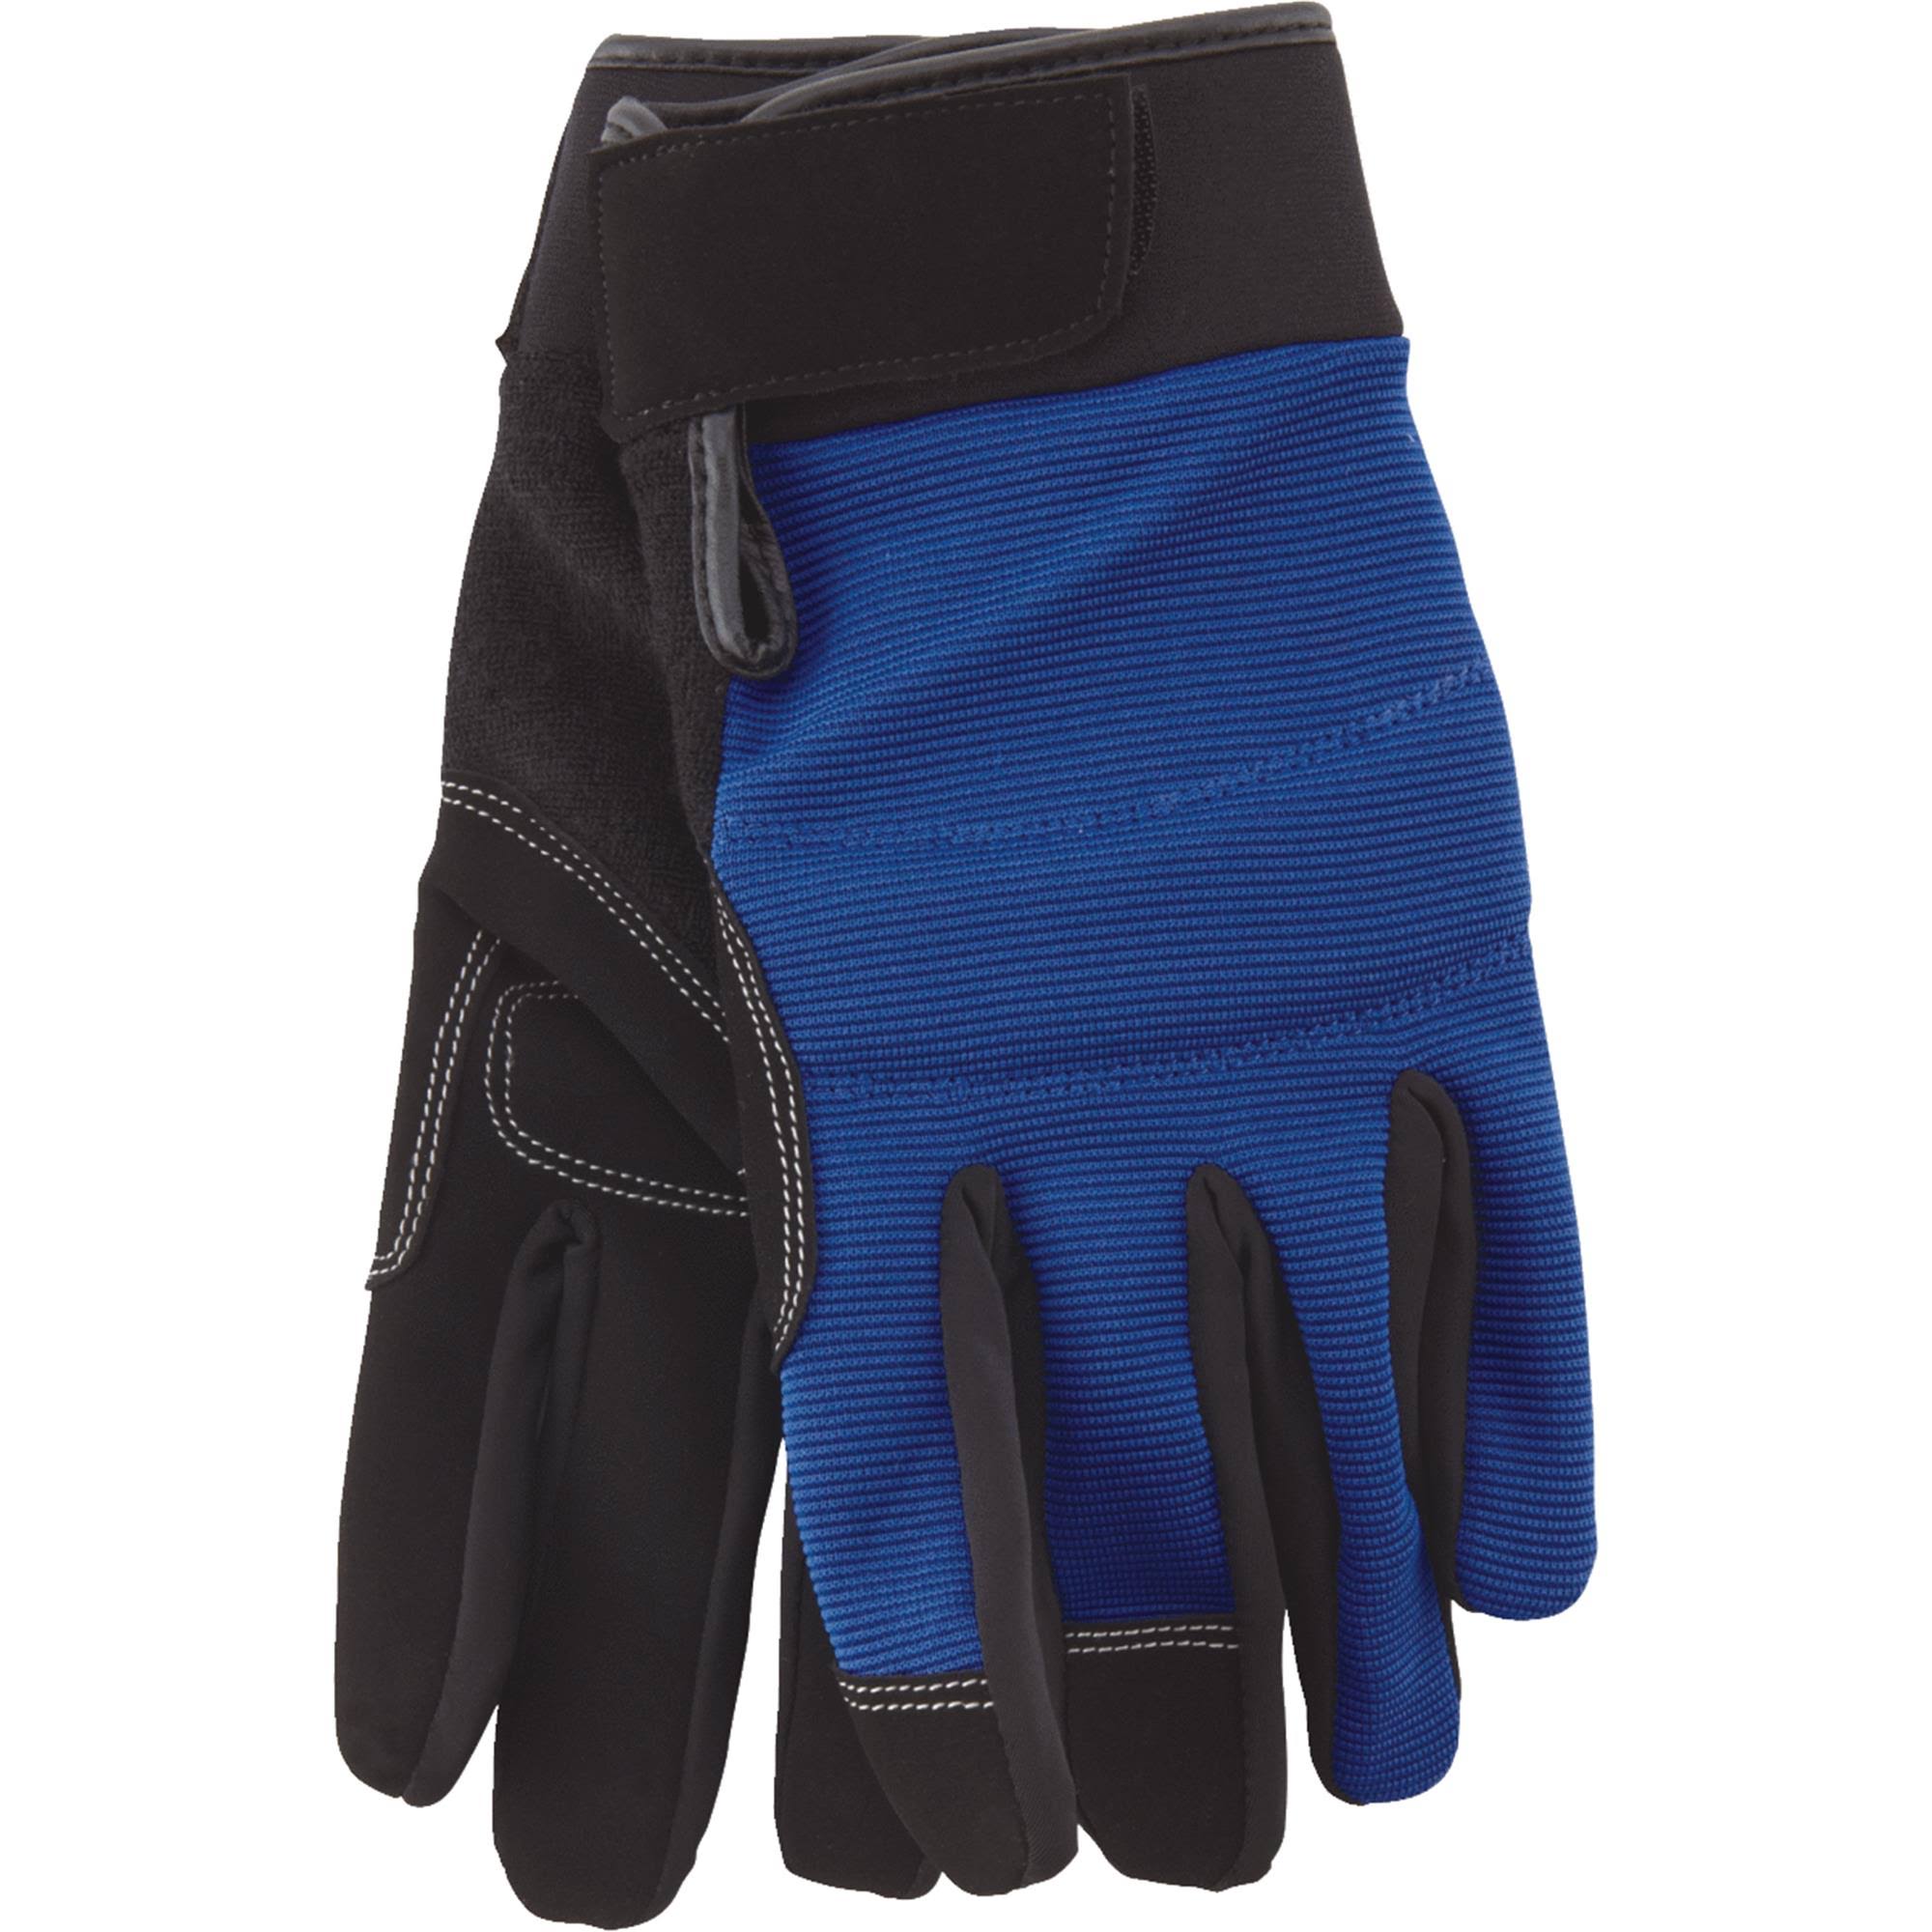 Do it High Performance Glove - With Hook & Loop Cuff, XLarge